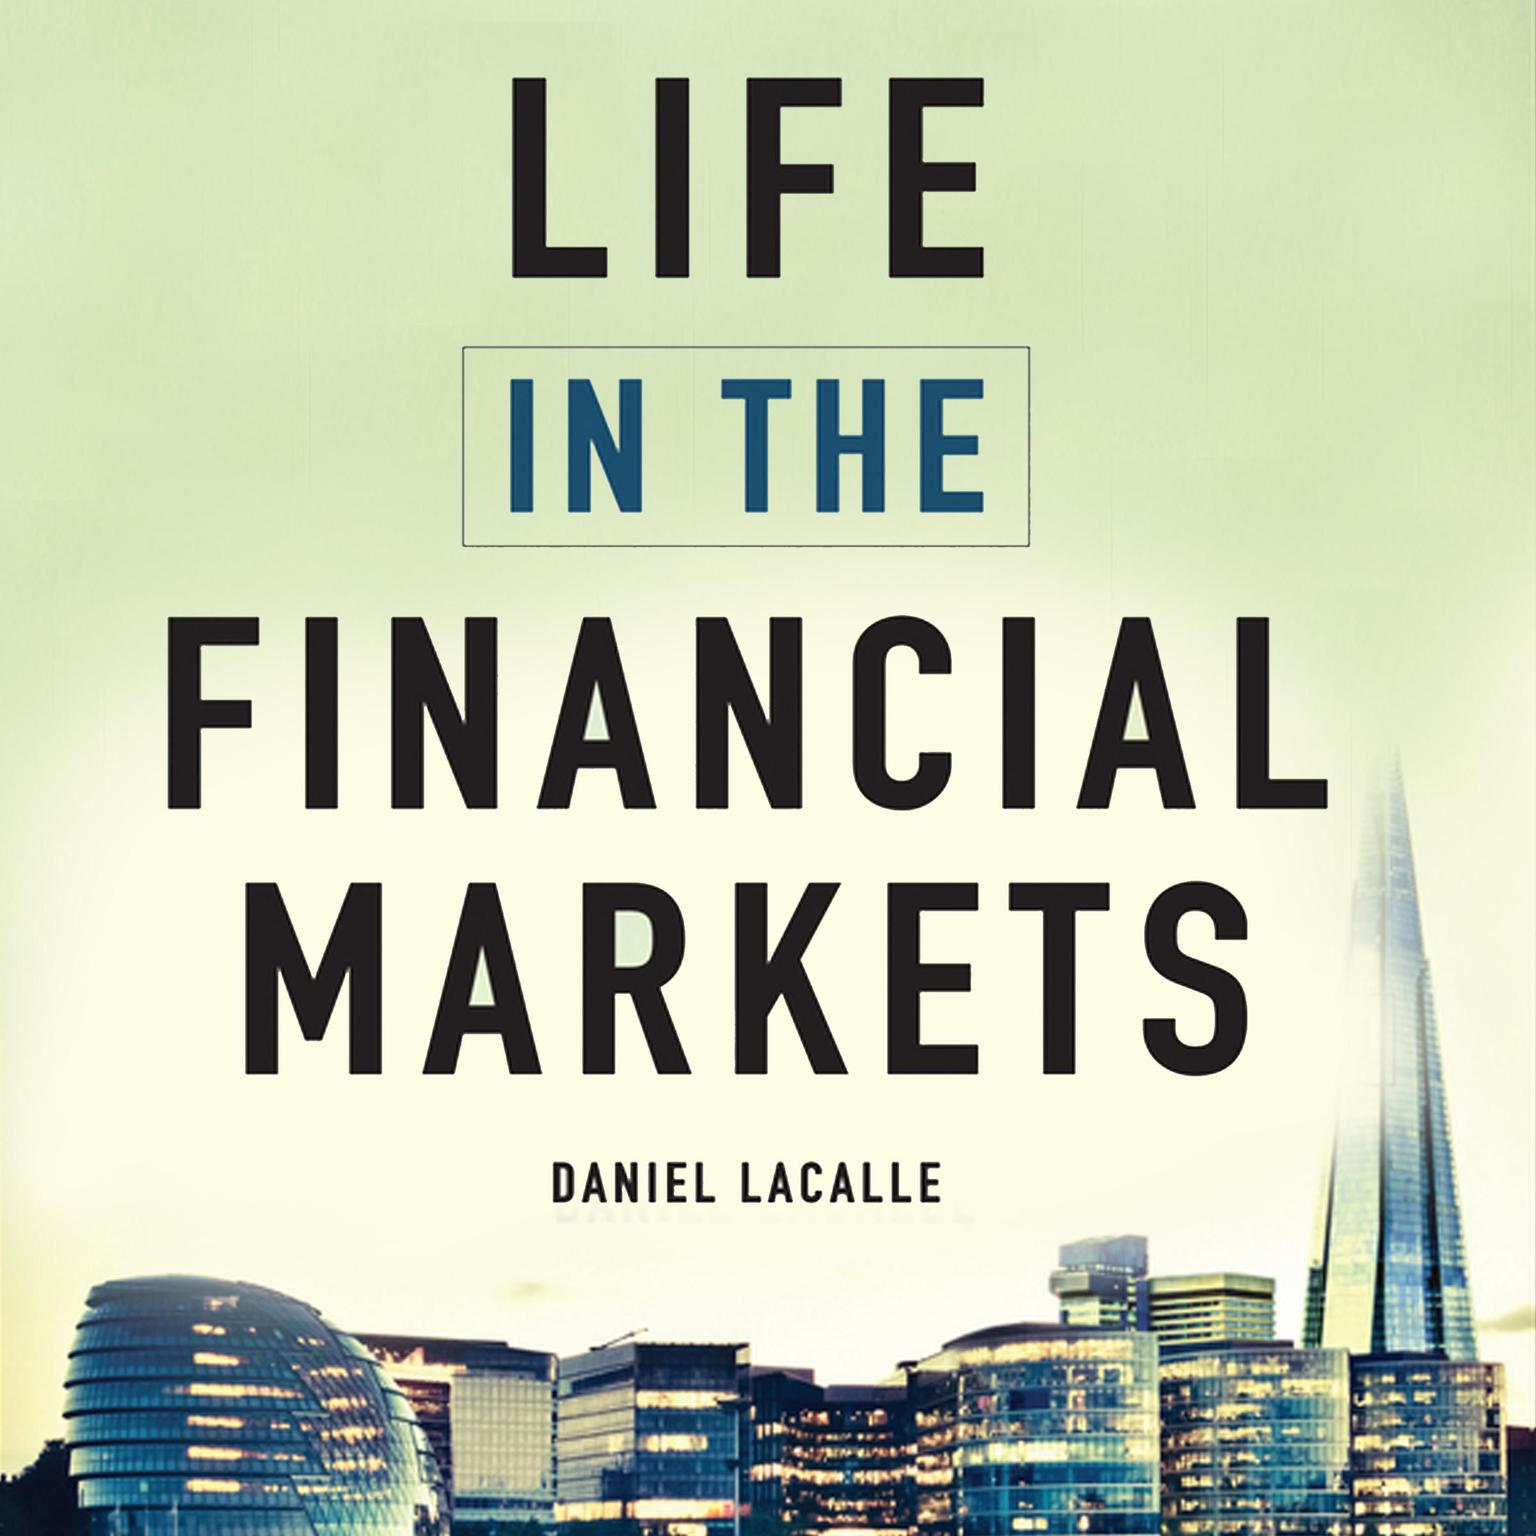 Life in the Financial Markets: How They Really Work And Why They Matter To You  Audiobook, by Daniel Lacalle